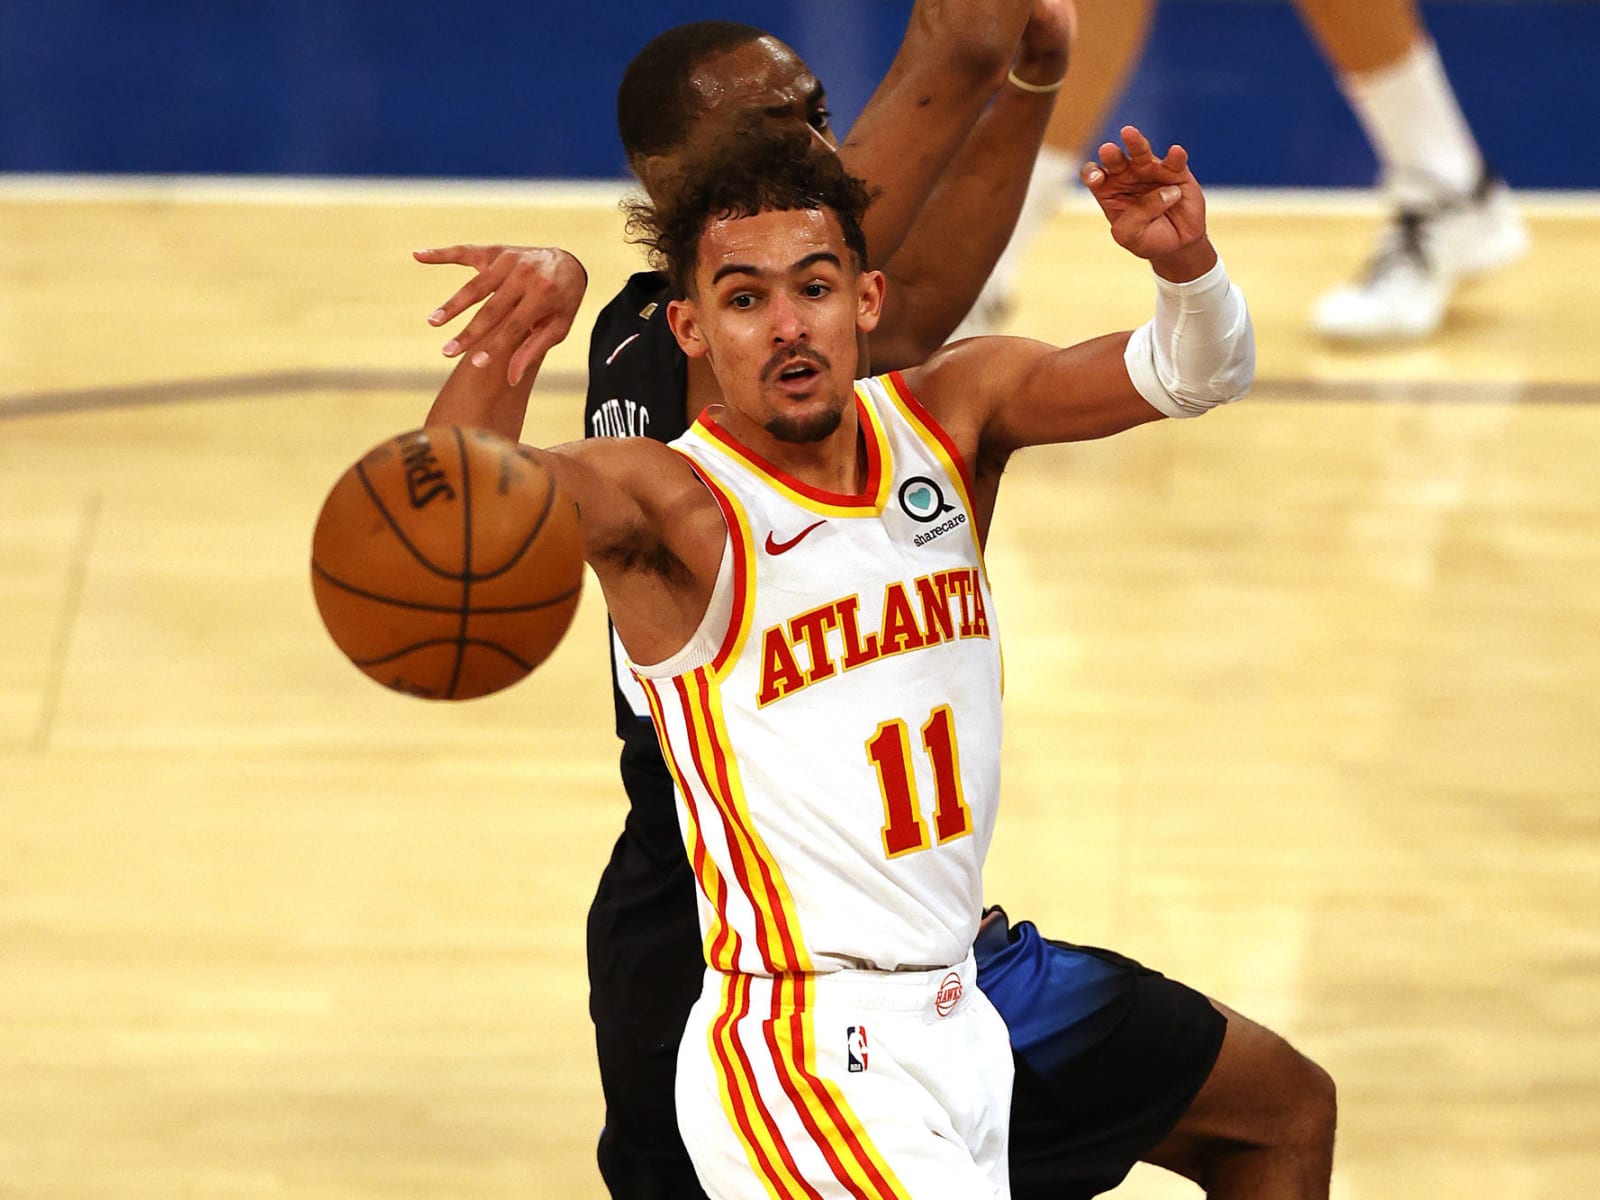 Trae Young bounced in first round of H-O-R-S-E competition